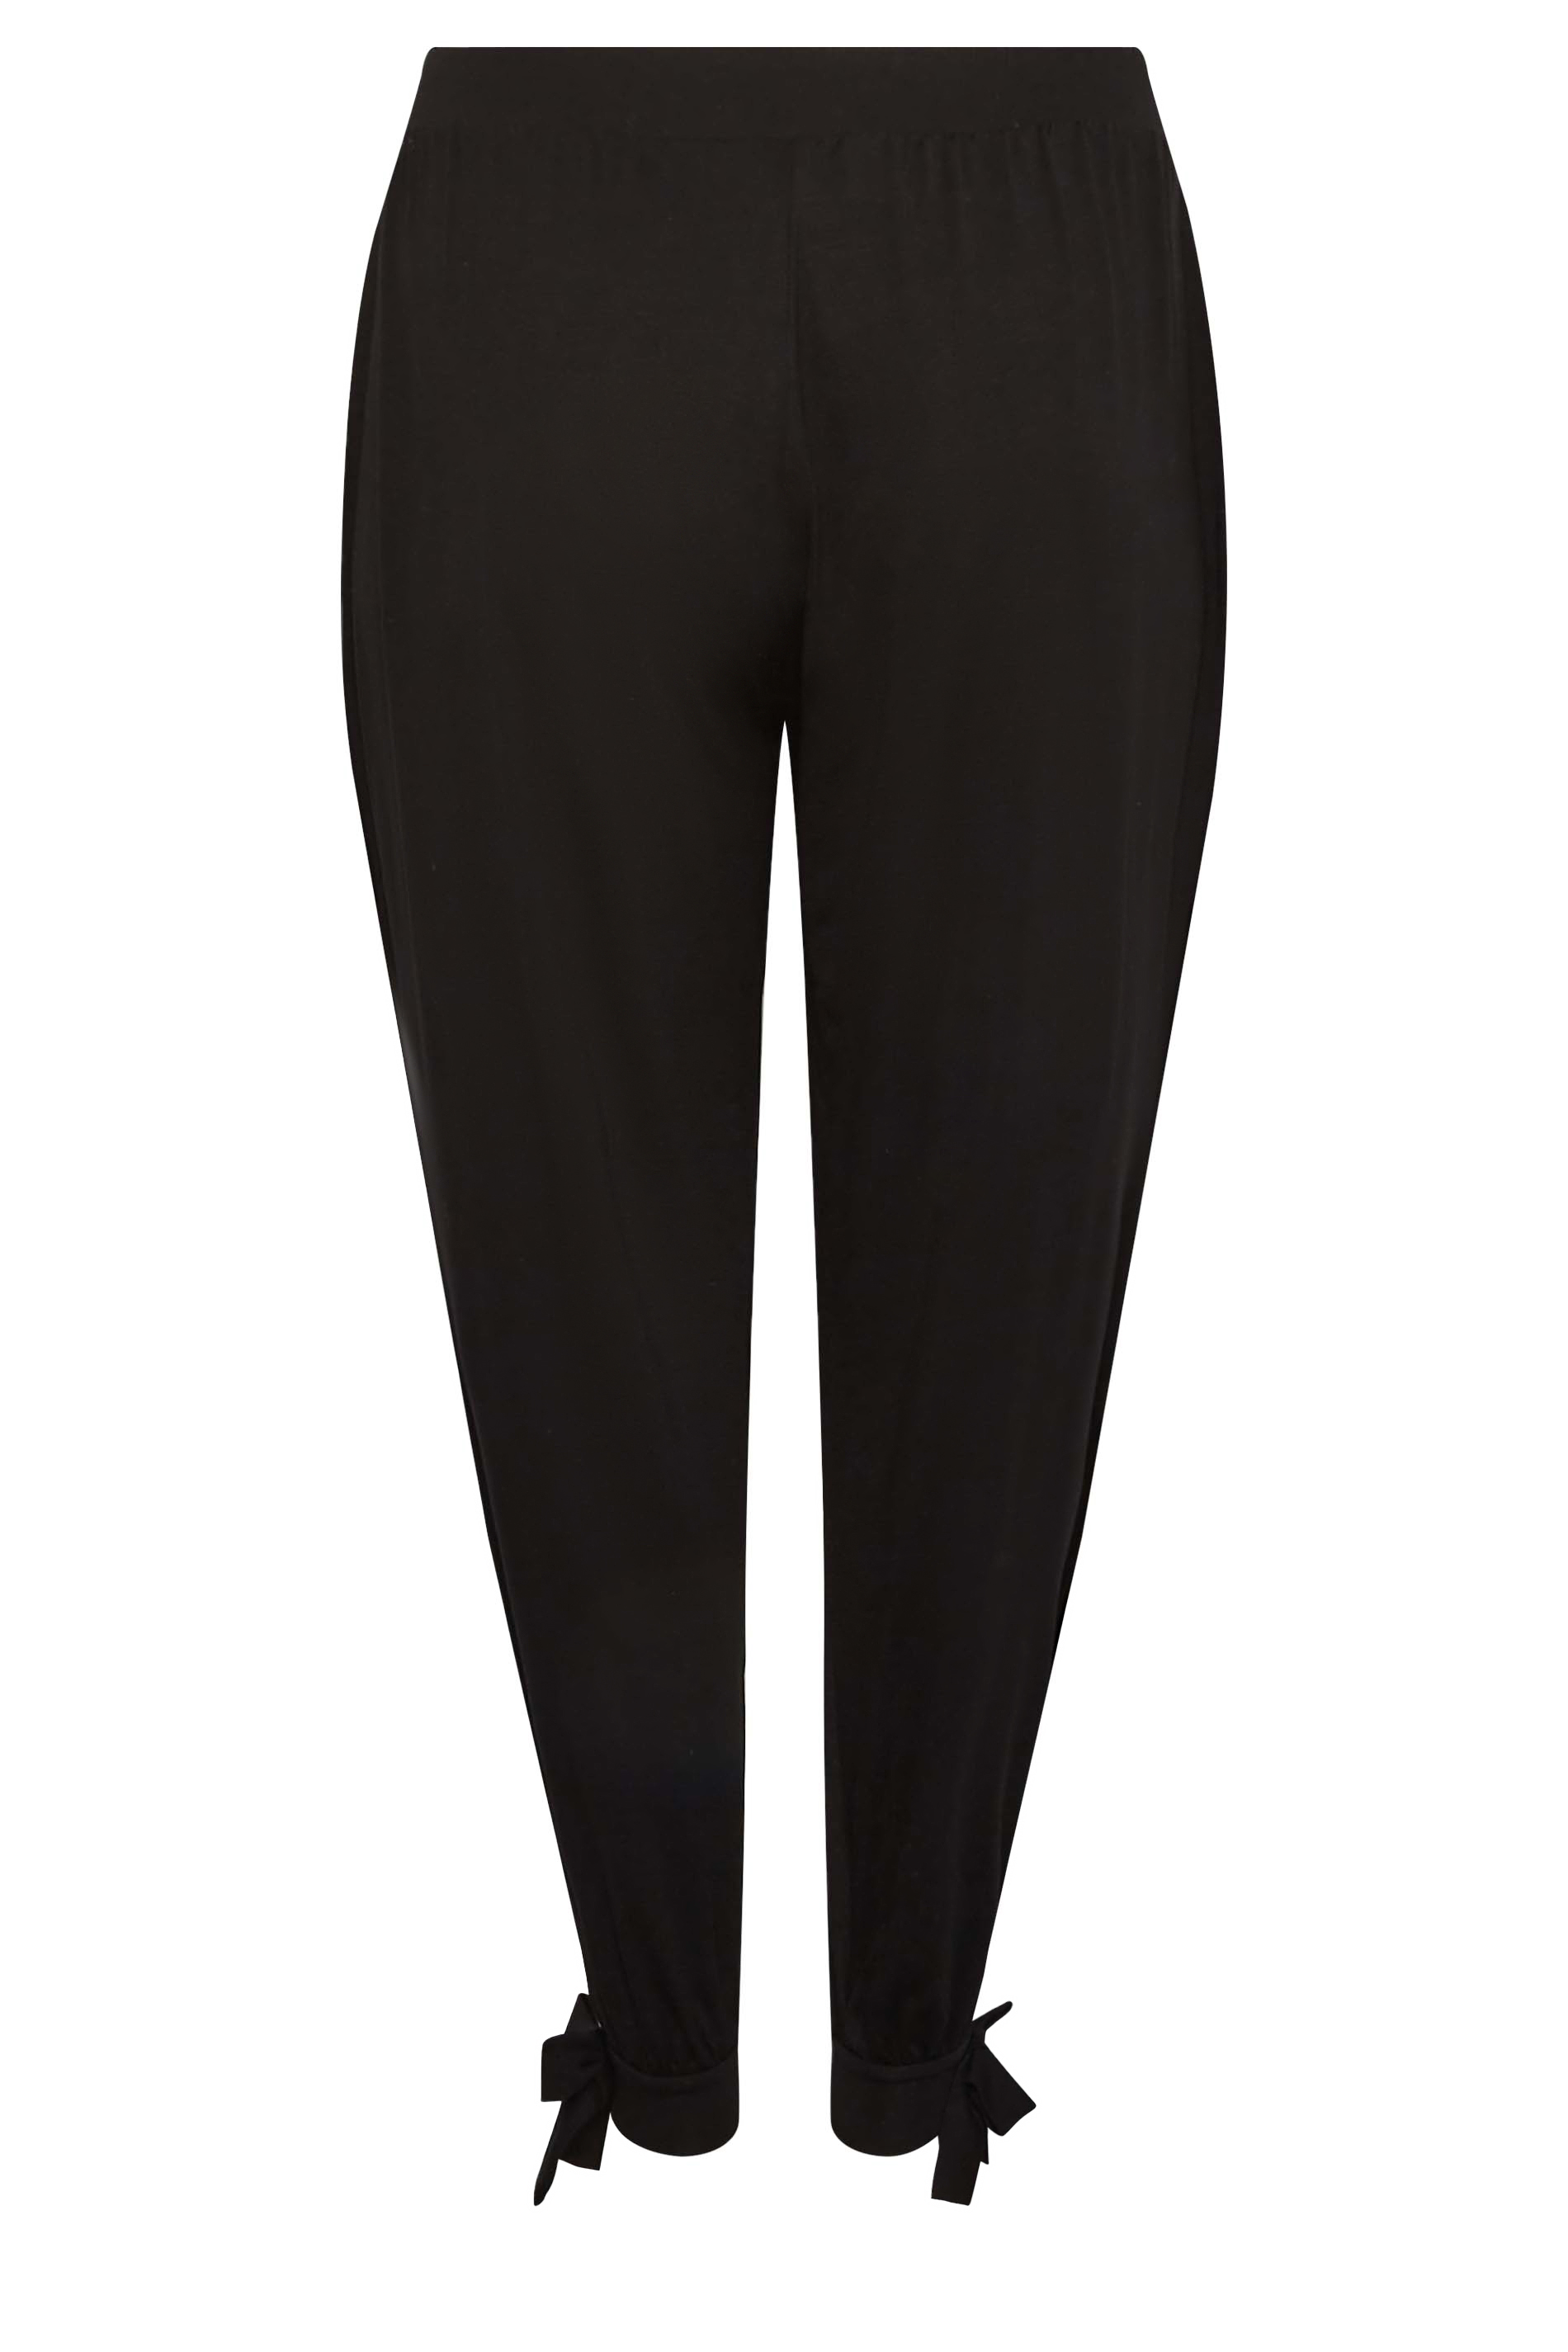 ASOS DESIGN Hourglass tailored tie waist tapered ankle grazer pants | ASOS